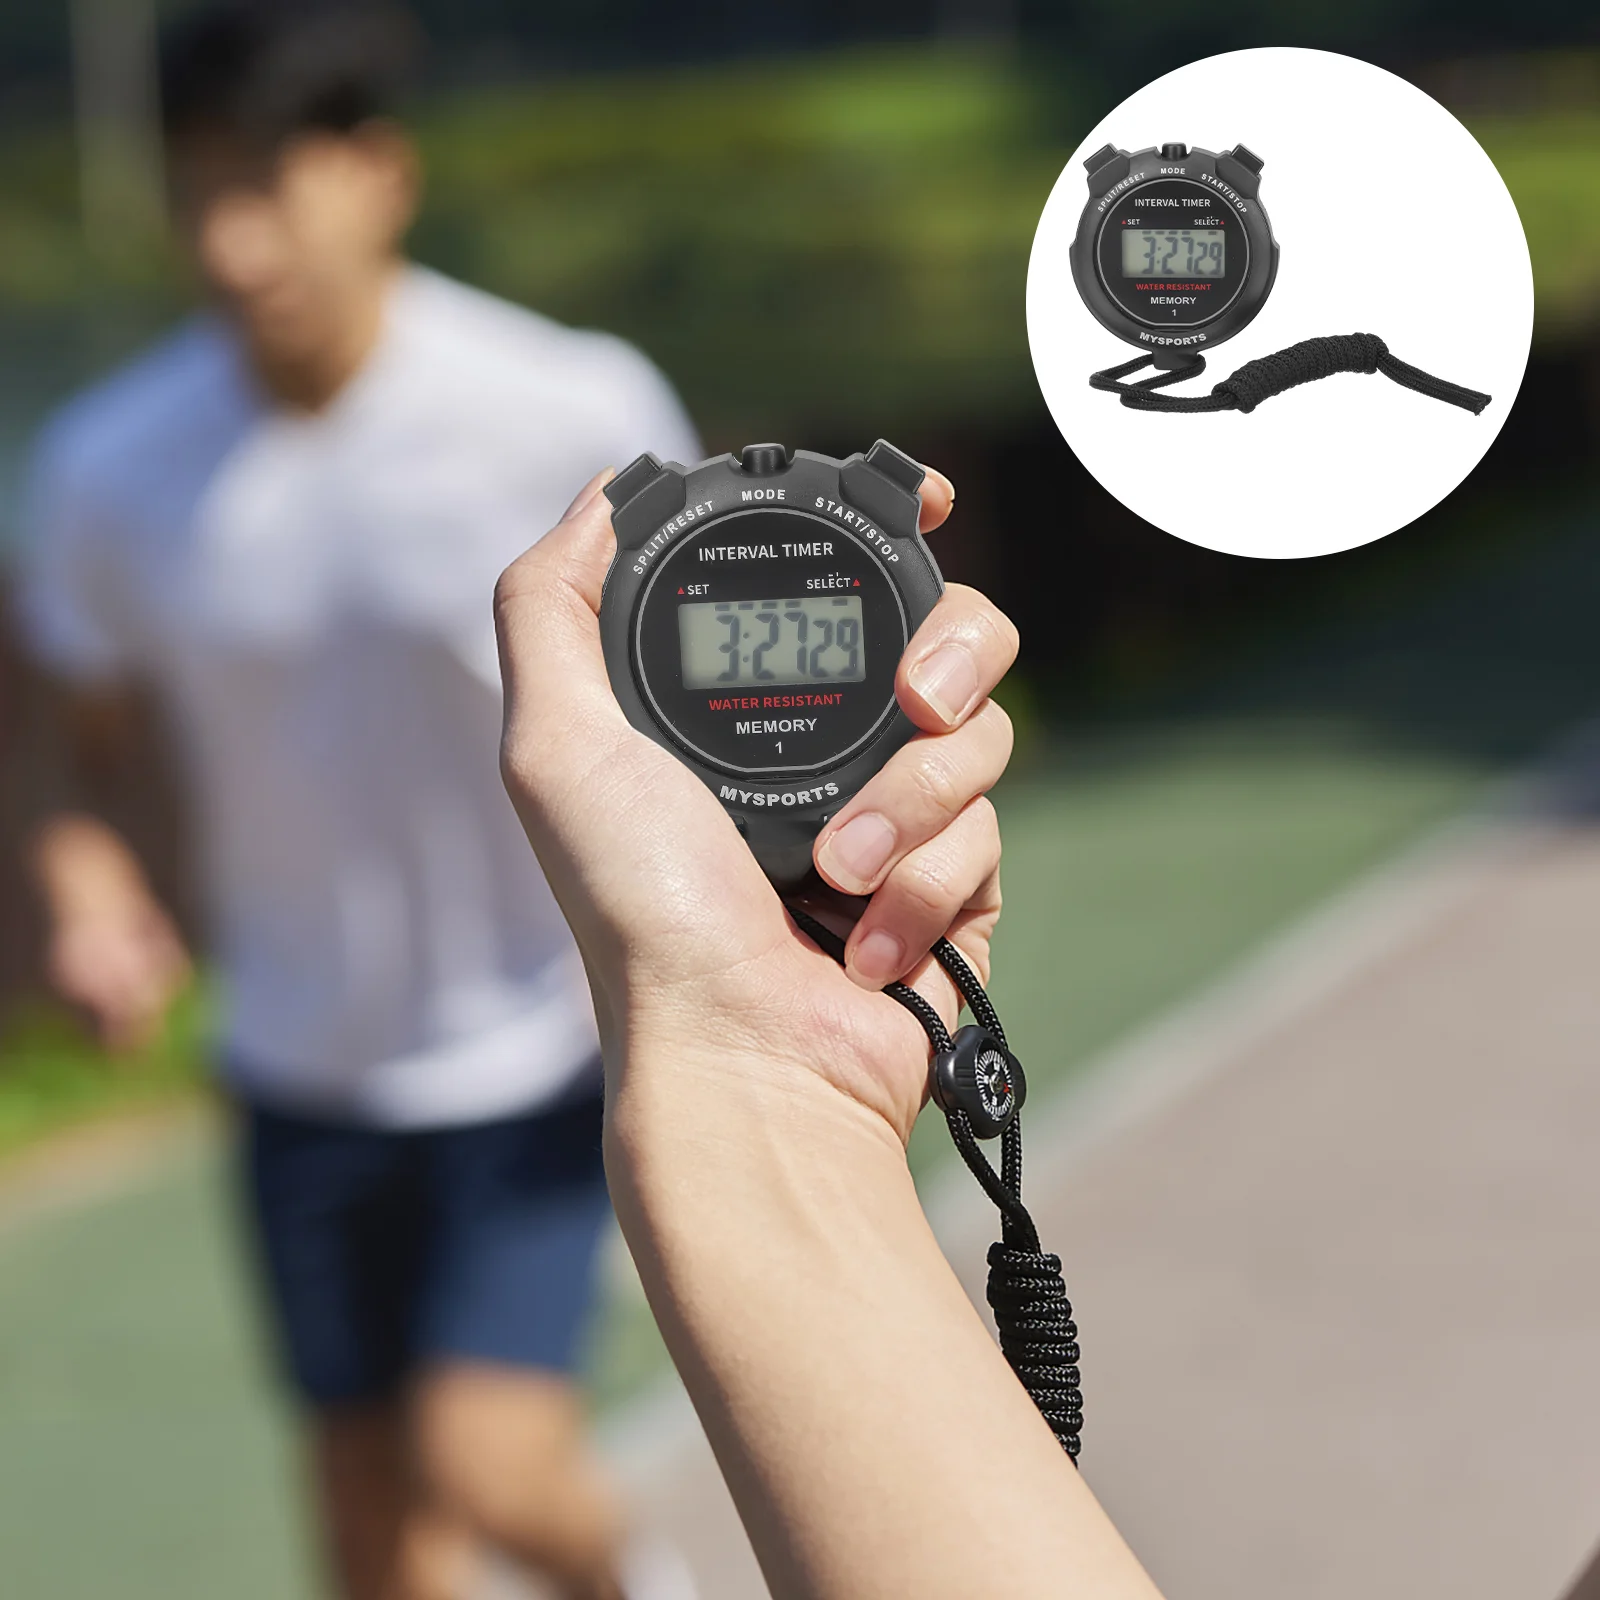 

Waterproof Chronograph Digital Timer Referees Sports Stopwatch Outdoor Electronic Multi-Function